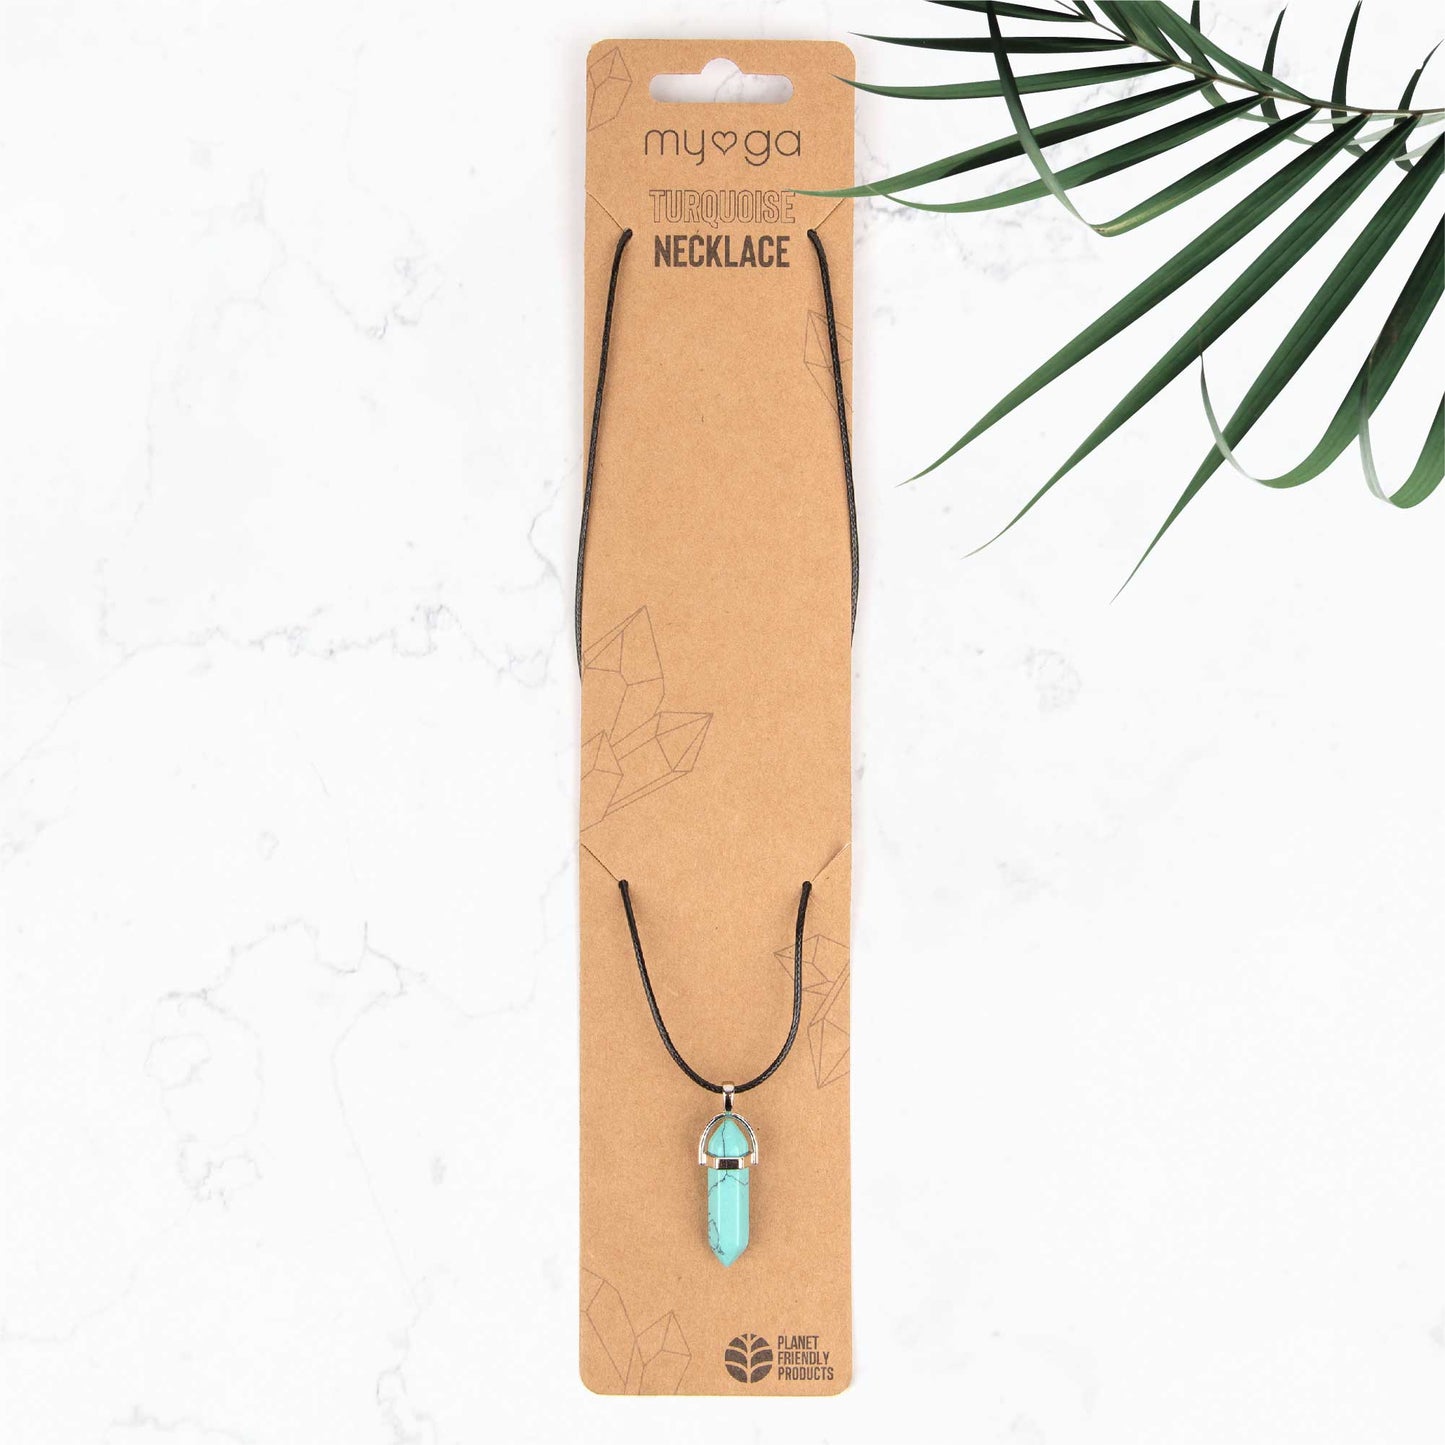 Crystal Pendant Necklace - Turquoise